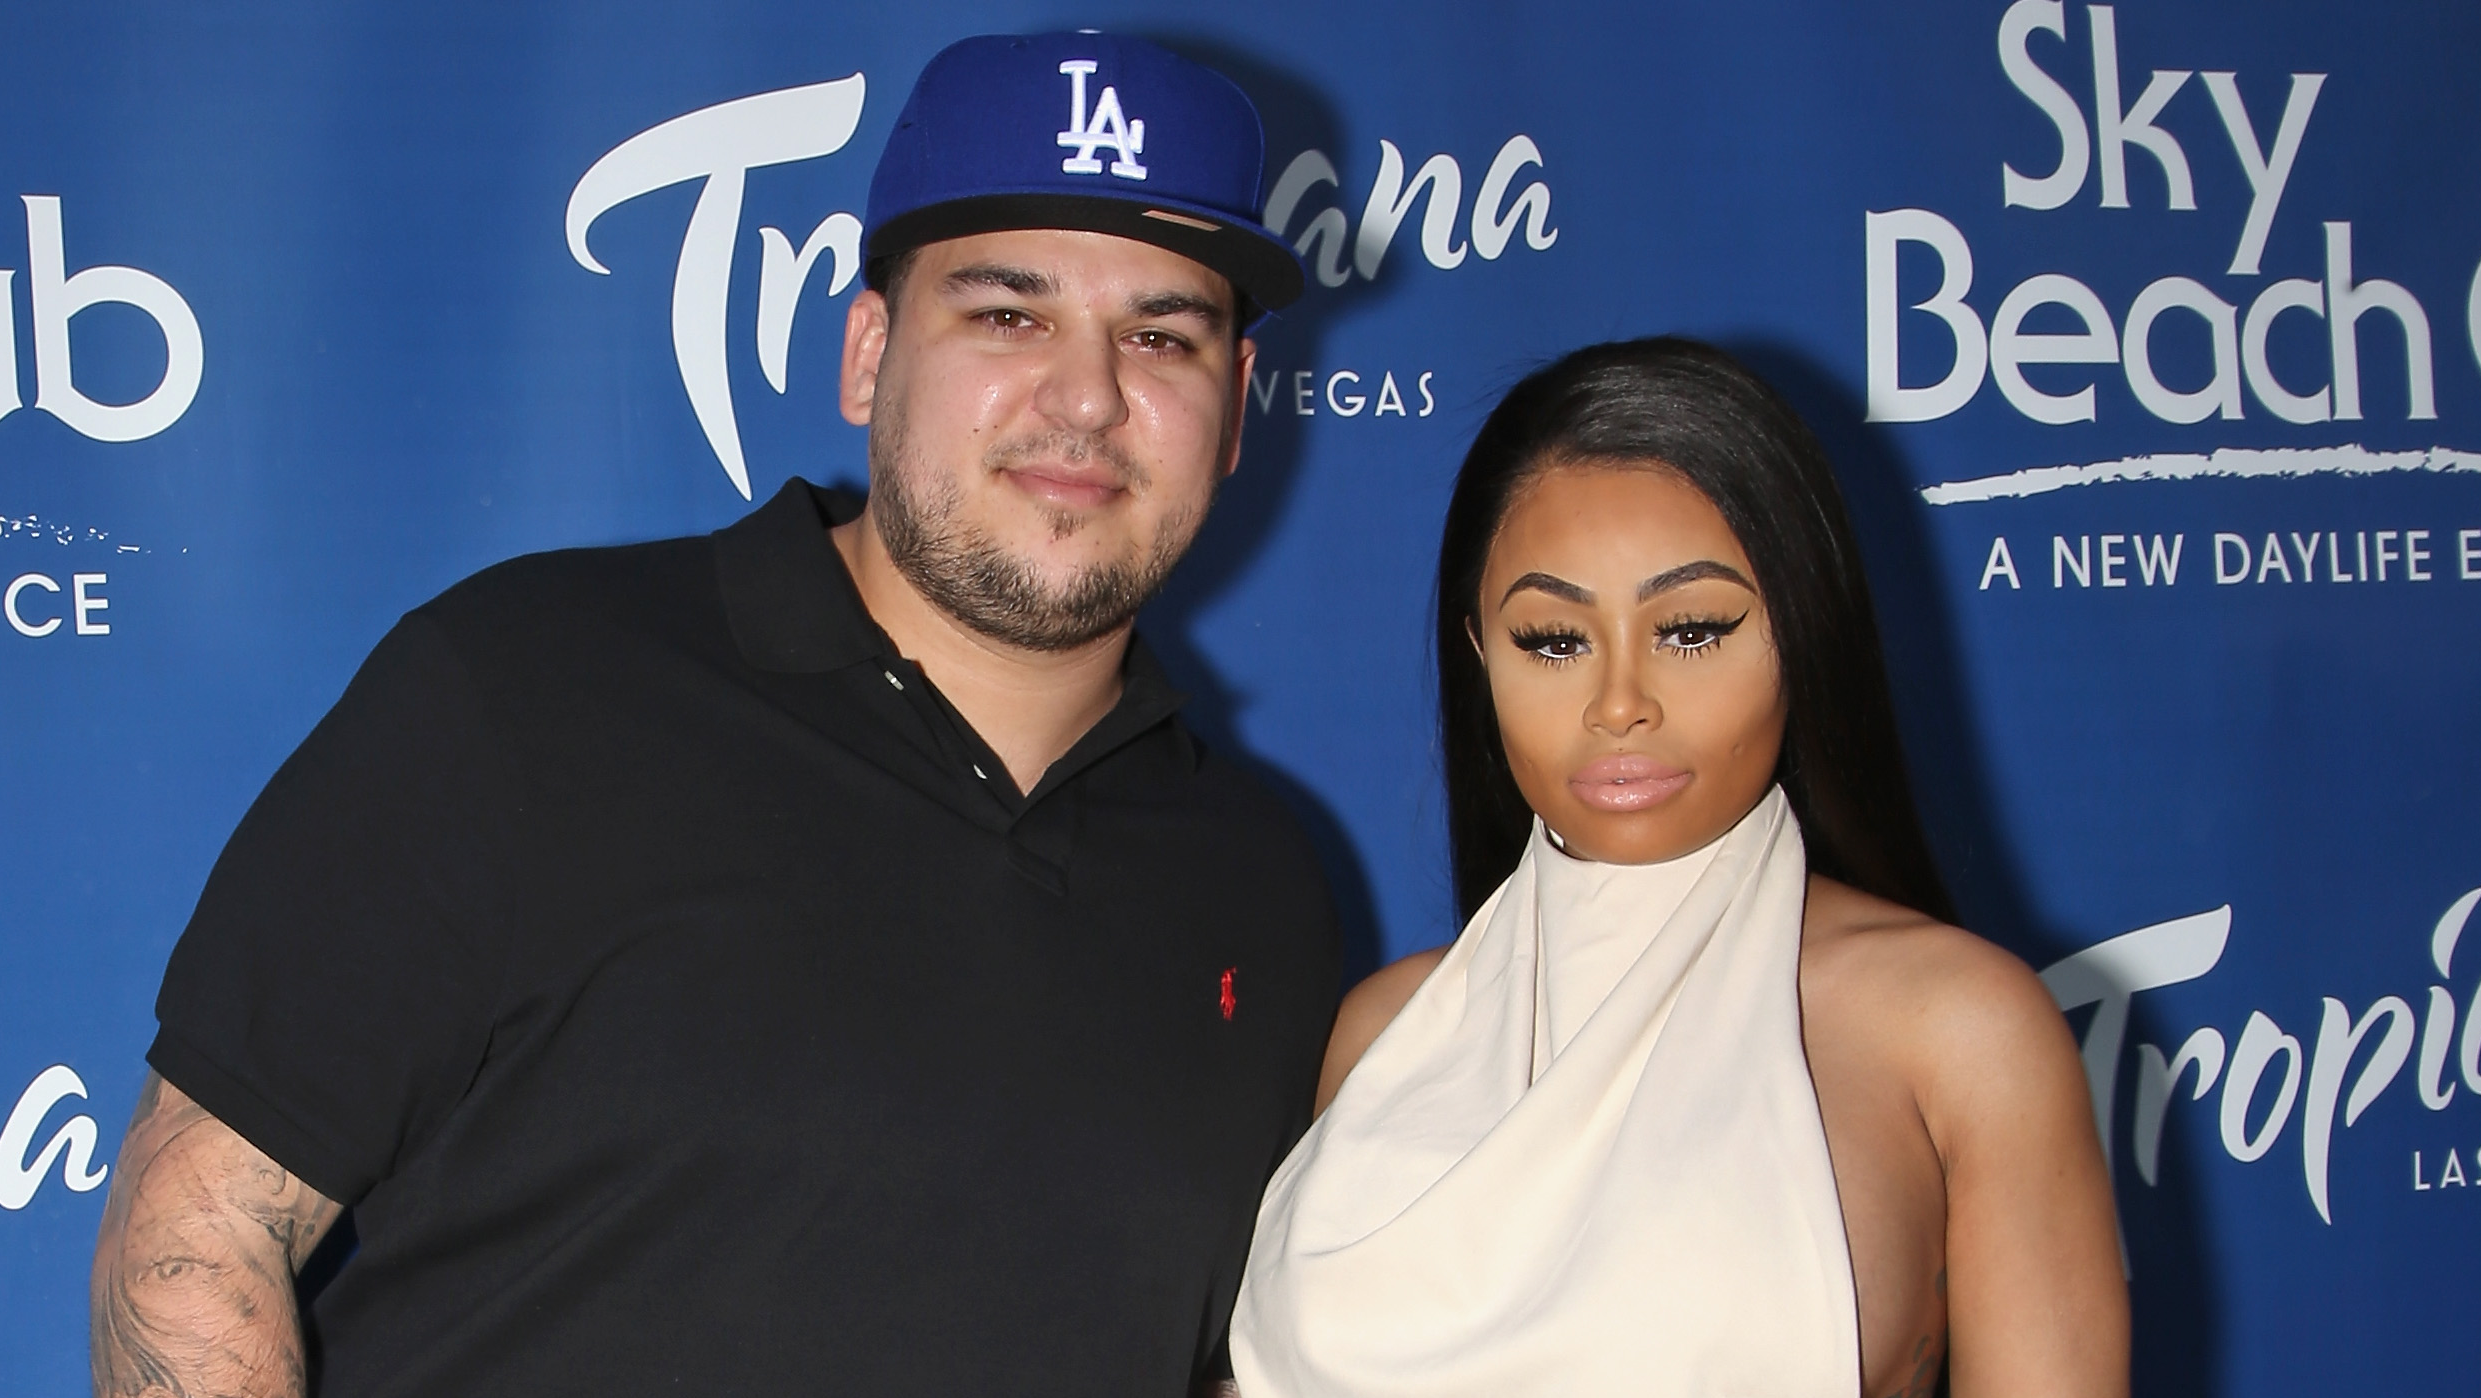 Rob Kardashian Heads To Court Amid Accusations He Threatened To Kill Blac Chyna’s Friend